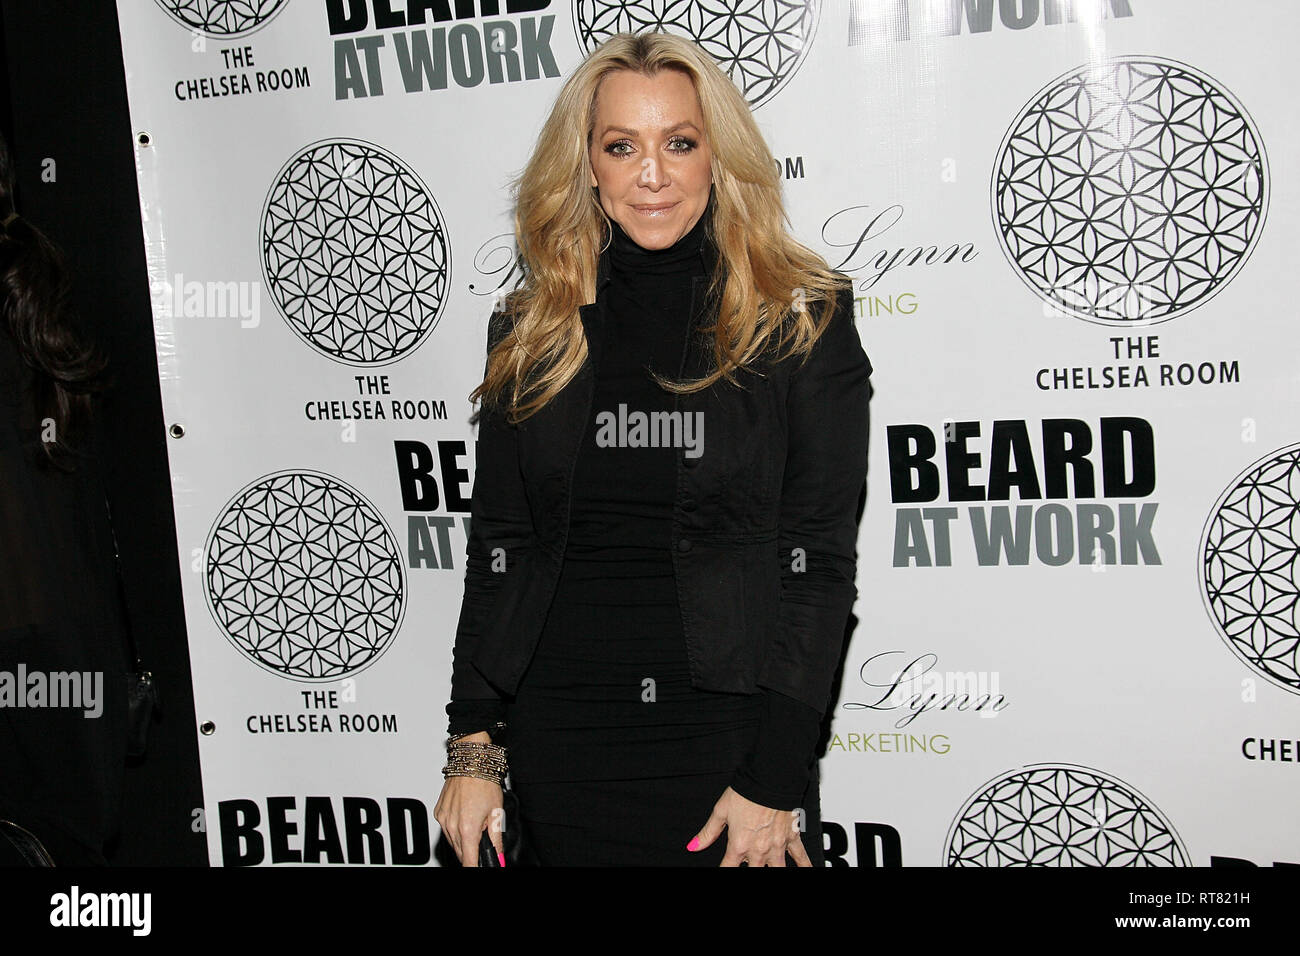 New York, USA. 03 Feb, 2011. Maggie Norris, Anna Rothschild at The Thursday, Feb 3, 2011 'Beard At Work' New York Screening Party at The Chelsea Room in New York, USA. Credit: Steve Mack/S.D. Mack Pictures/Alamy Stock Photo